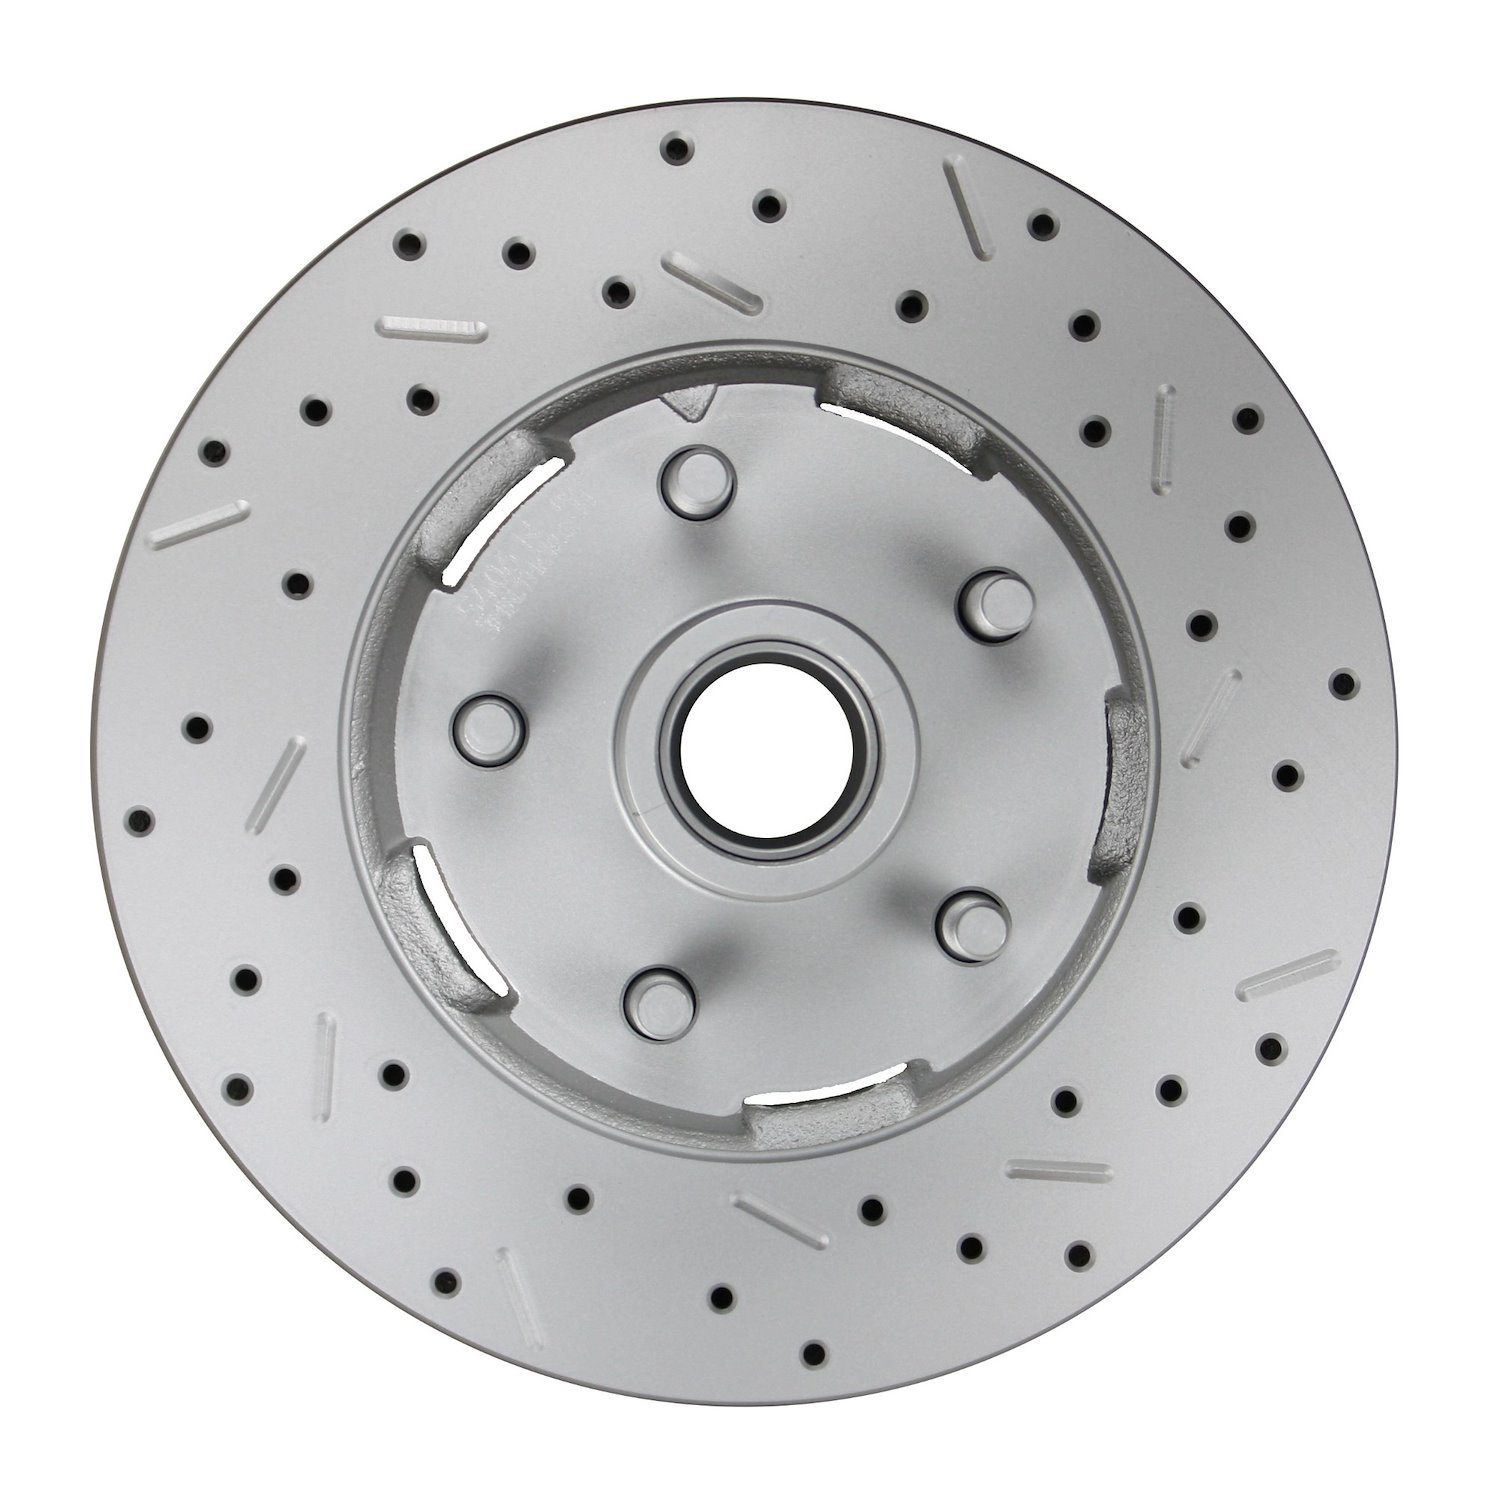 5406001 RCDS Disc Brake Rotor, Cross Drilled & Slotted Front Rotor For Ford 4-Piston Cars